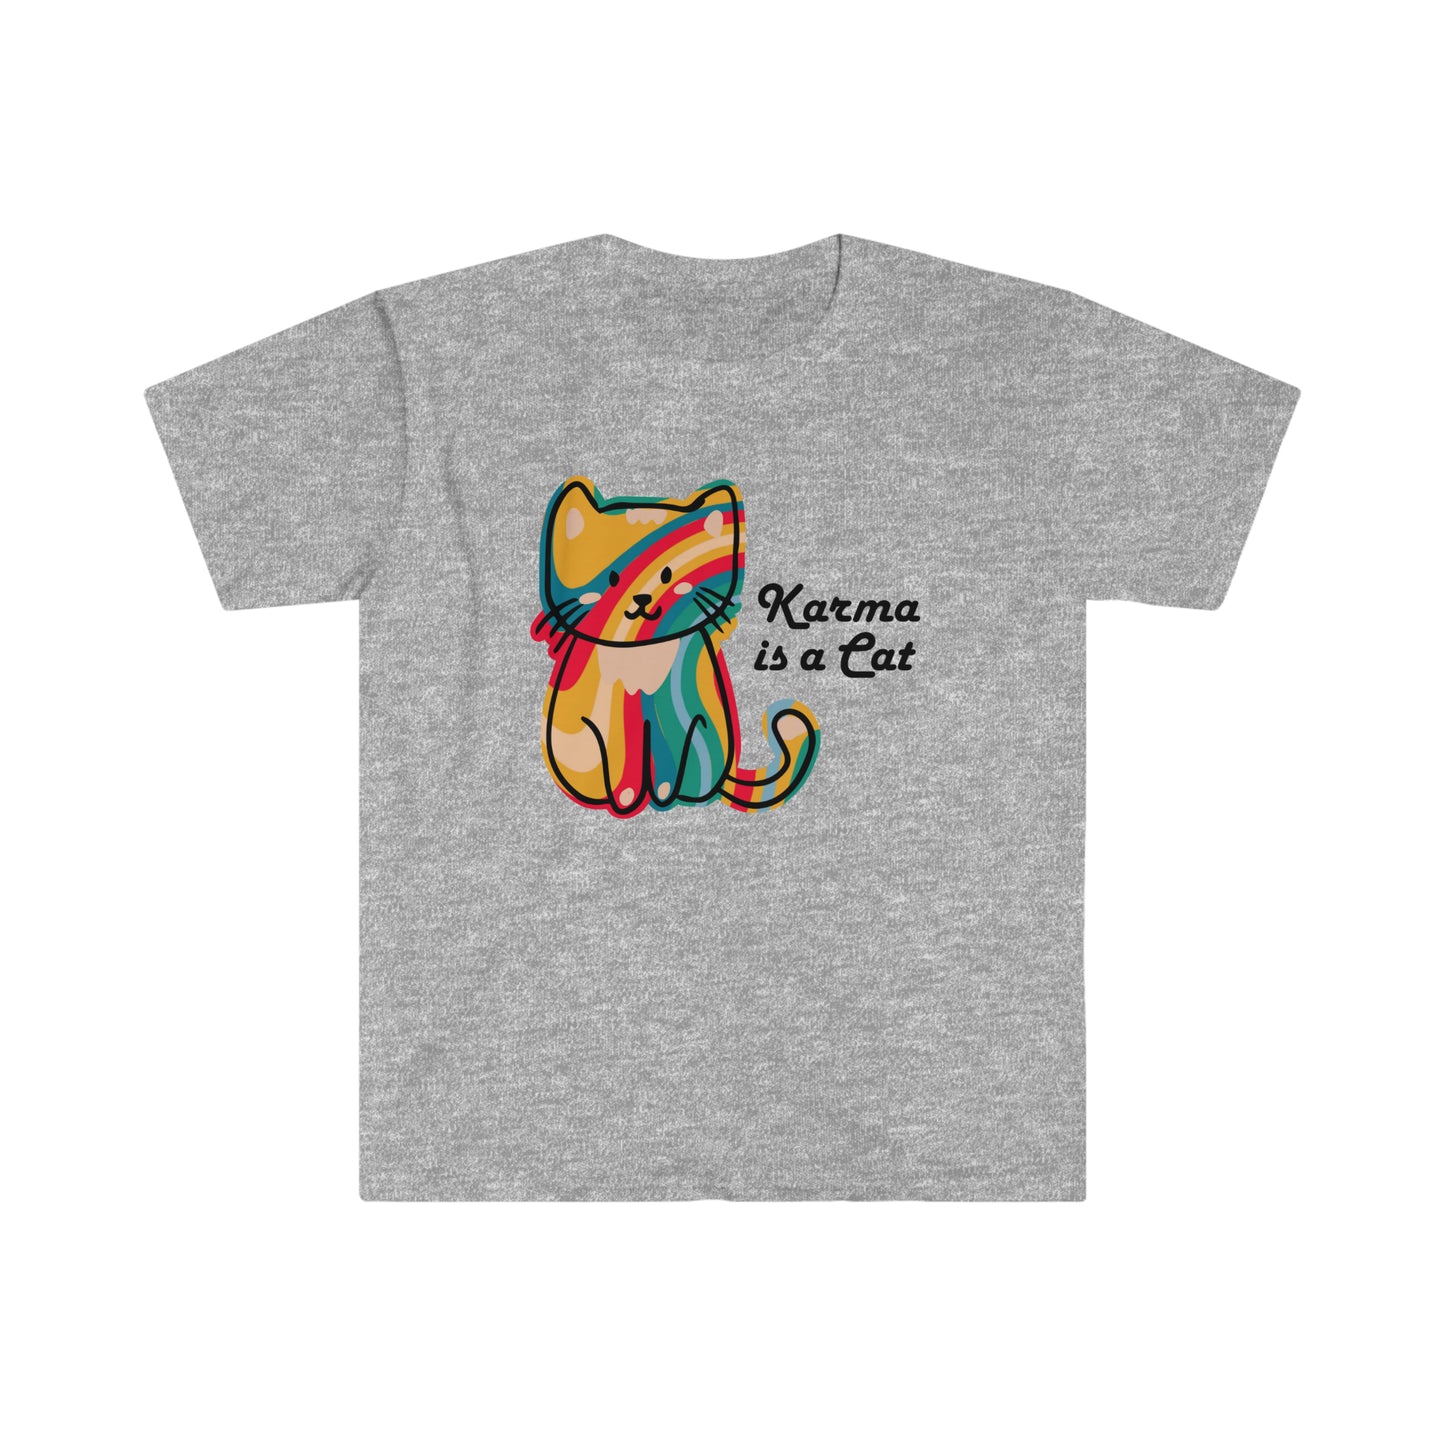 Swifty Karma is a Cat - Unisex Softstyle T-Shirt